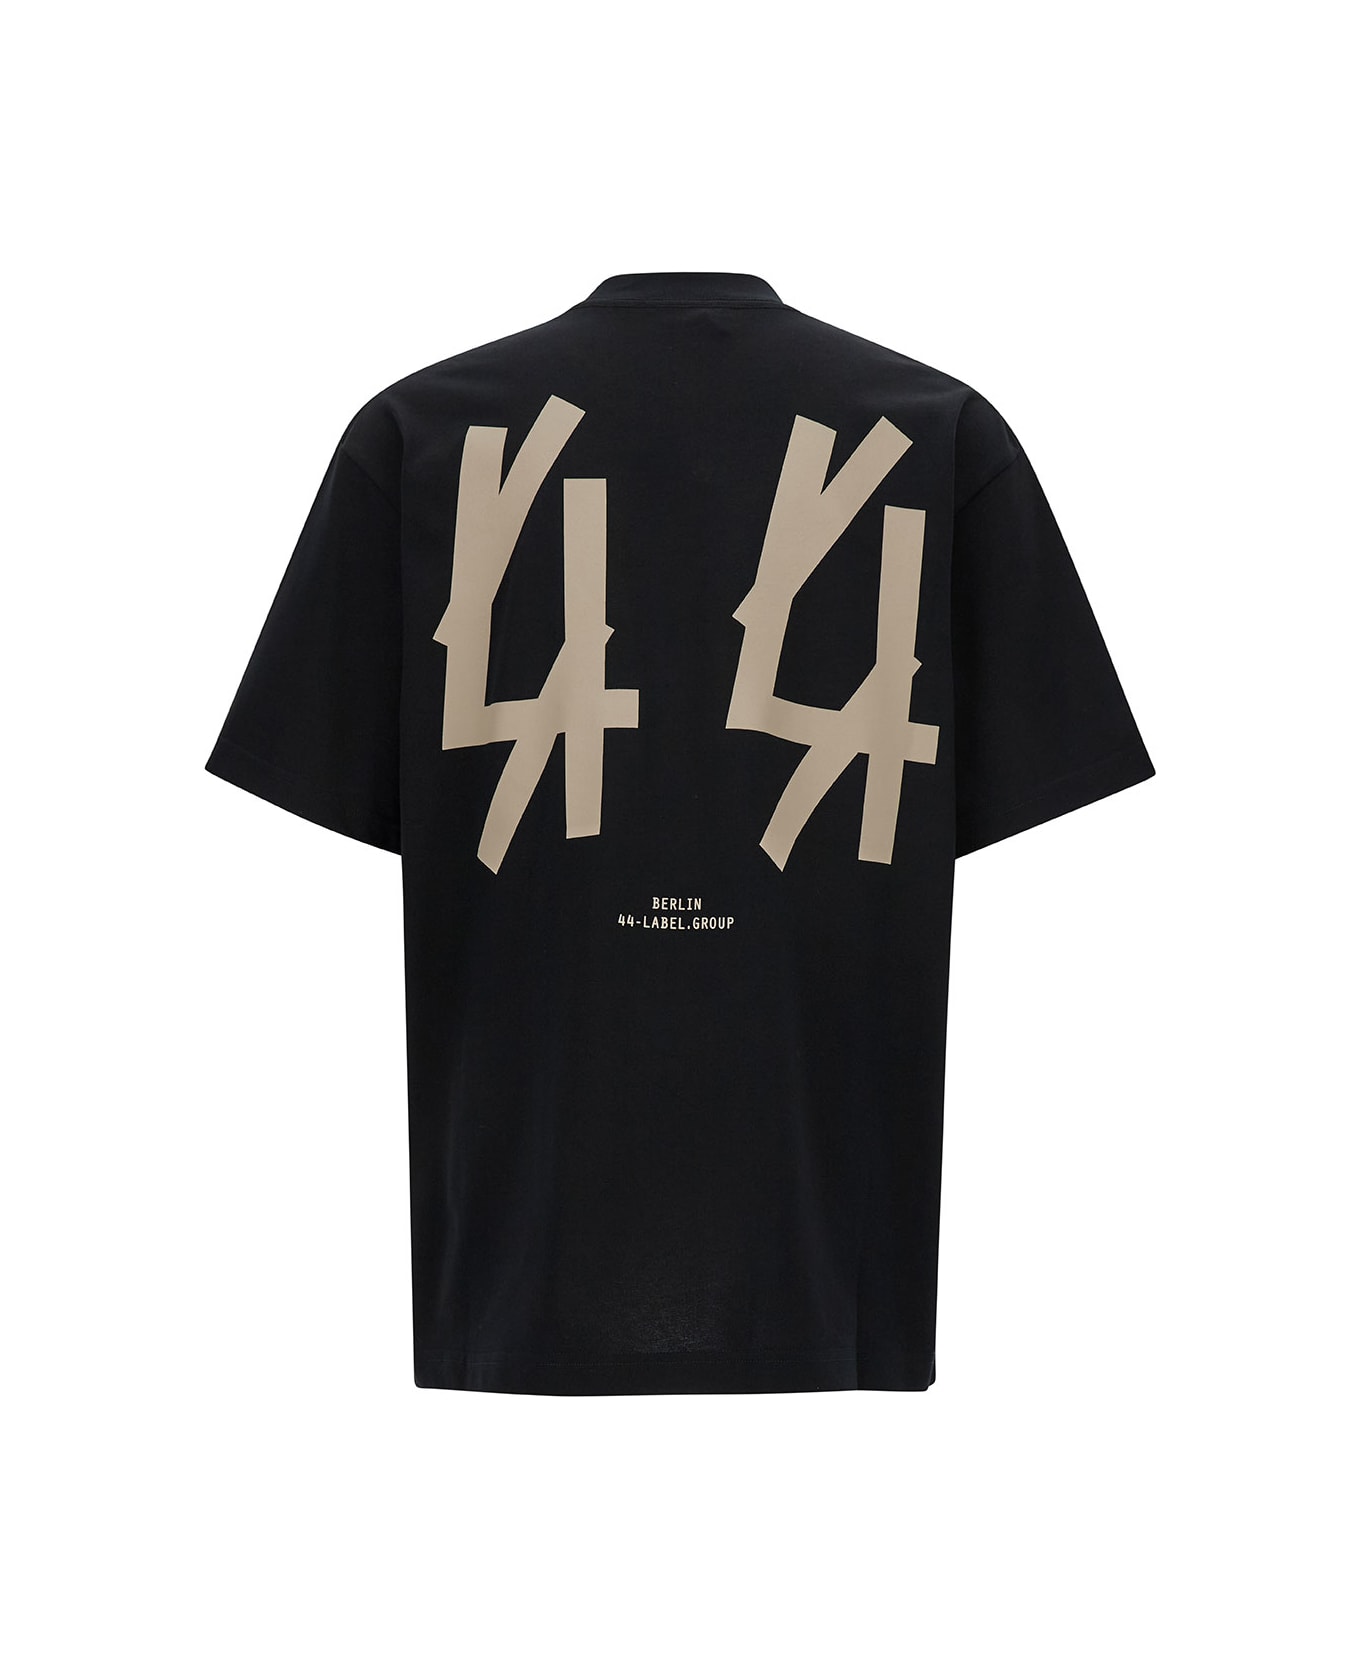 44 Label Group Black T-shirt With Logo Embroidery And Print In Cotton Man T-Shirt - BLACK